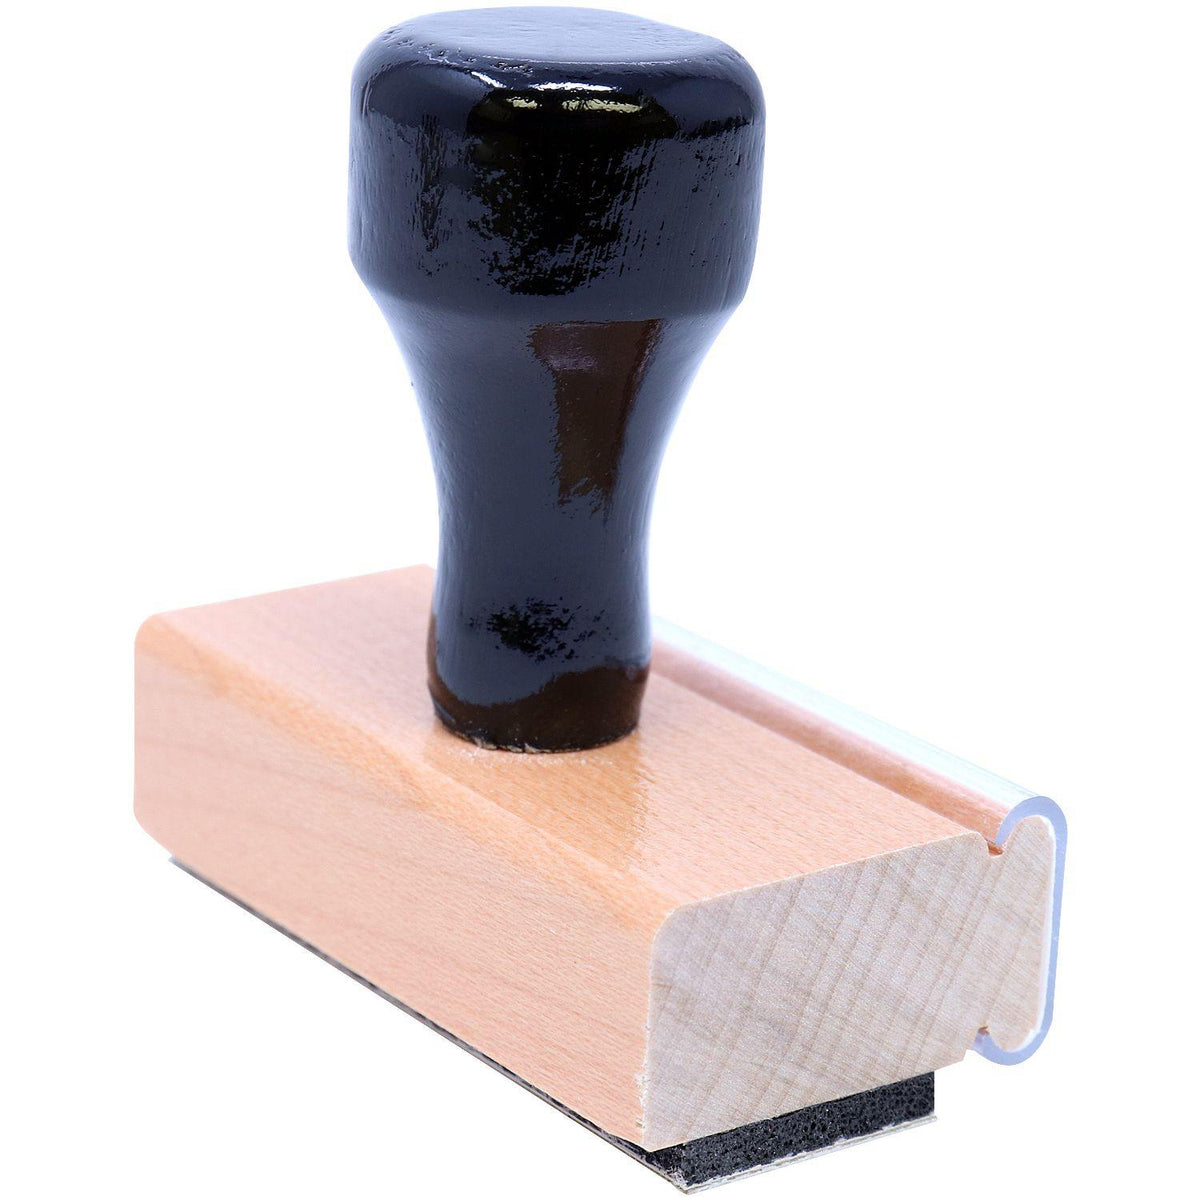 Large Workers Comp Rubber Stamp - Engineer Seal Stamps - Brand_Acorn, Impression Size_Large, Stamp Type_Regular Stamp, Type of Use_Office